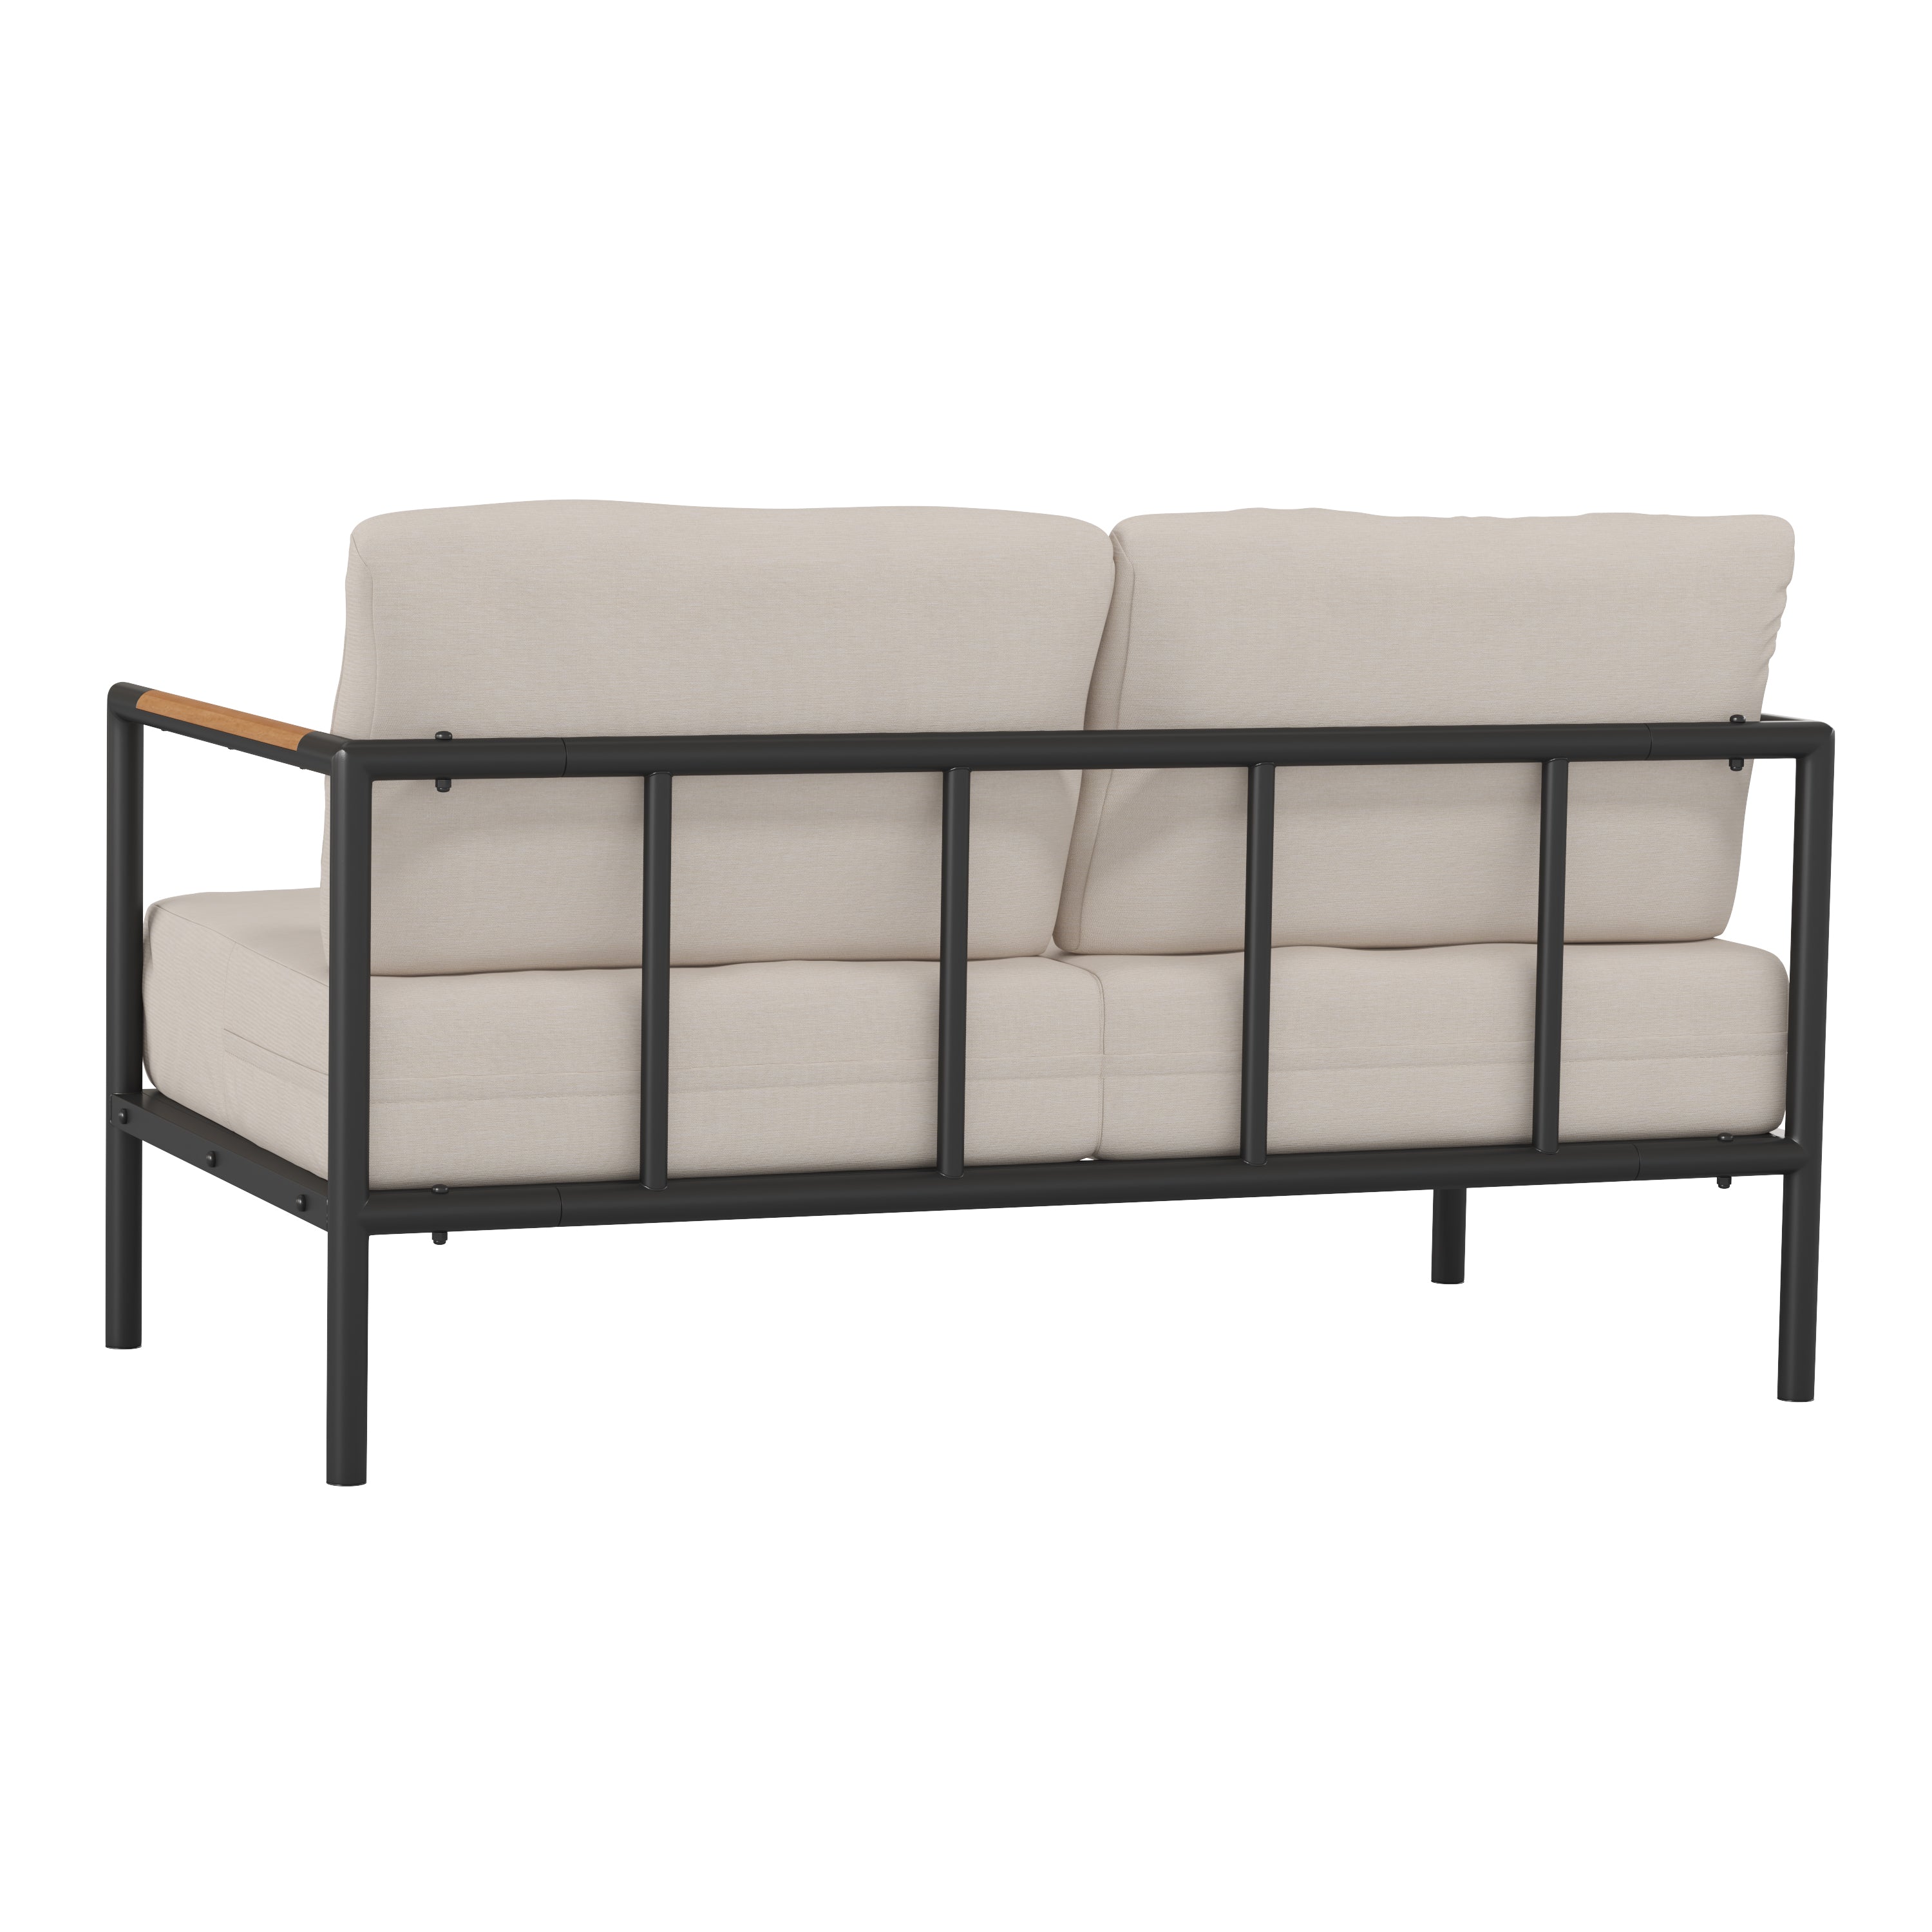 Lea Indoor/Outdoor Patio Loveseat with Cushions - Modern Aluminum Framed Loveseat with Teak Accent Arms-Outdoor Loveseat-Flash Furniture-Wall2Wall Furnishings